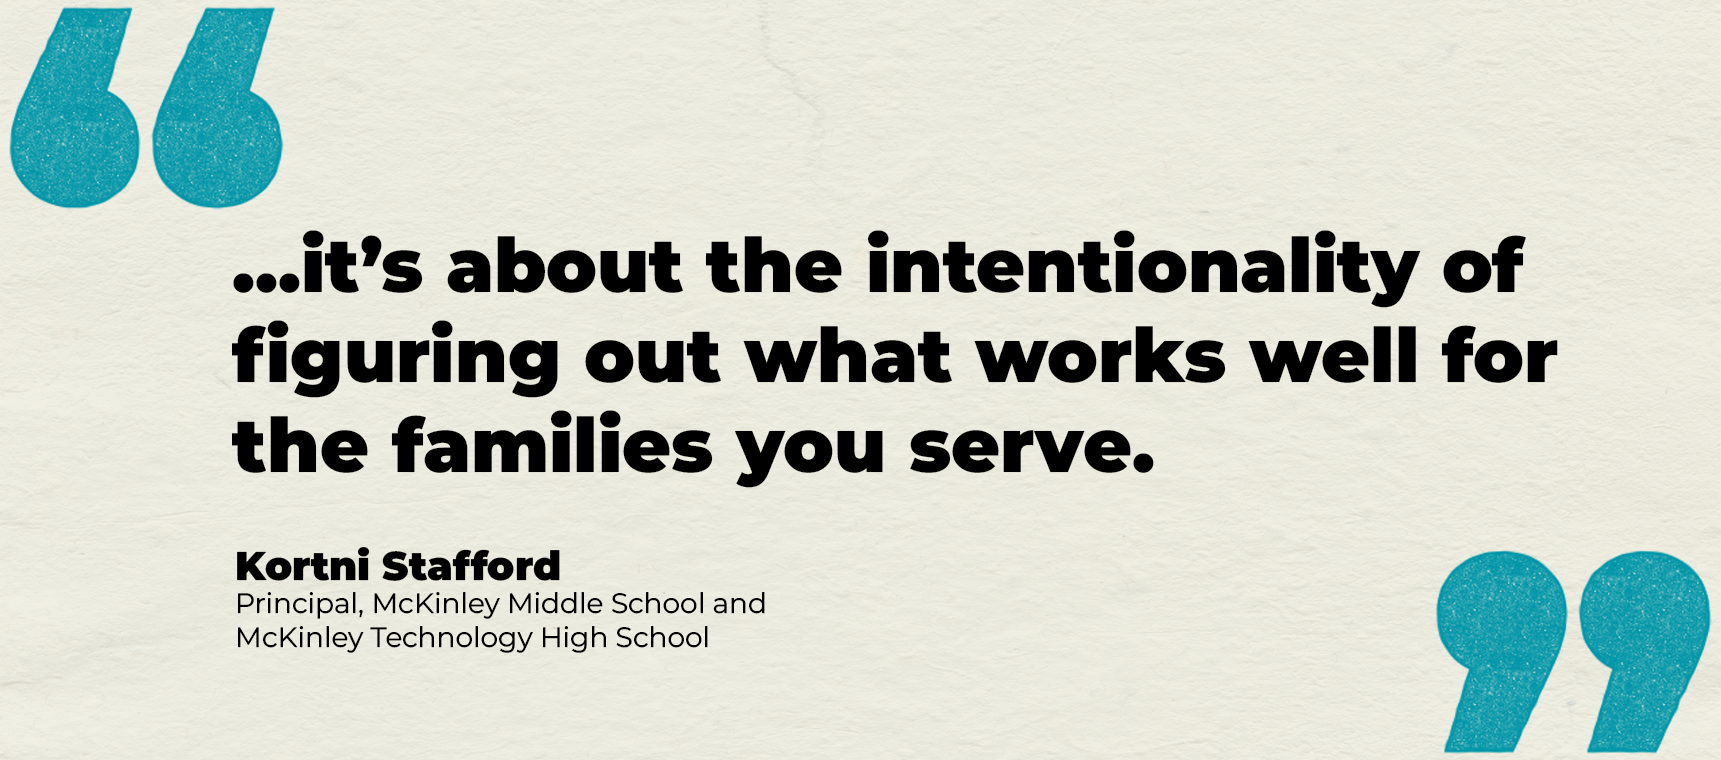 "...it’s about the intentionality of figuring out what works well for the families you serve." quote from Kortni Stafford Principal, McKinley Middle School and McKinley Technology High School